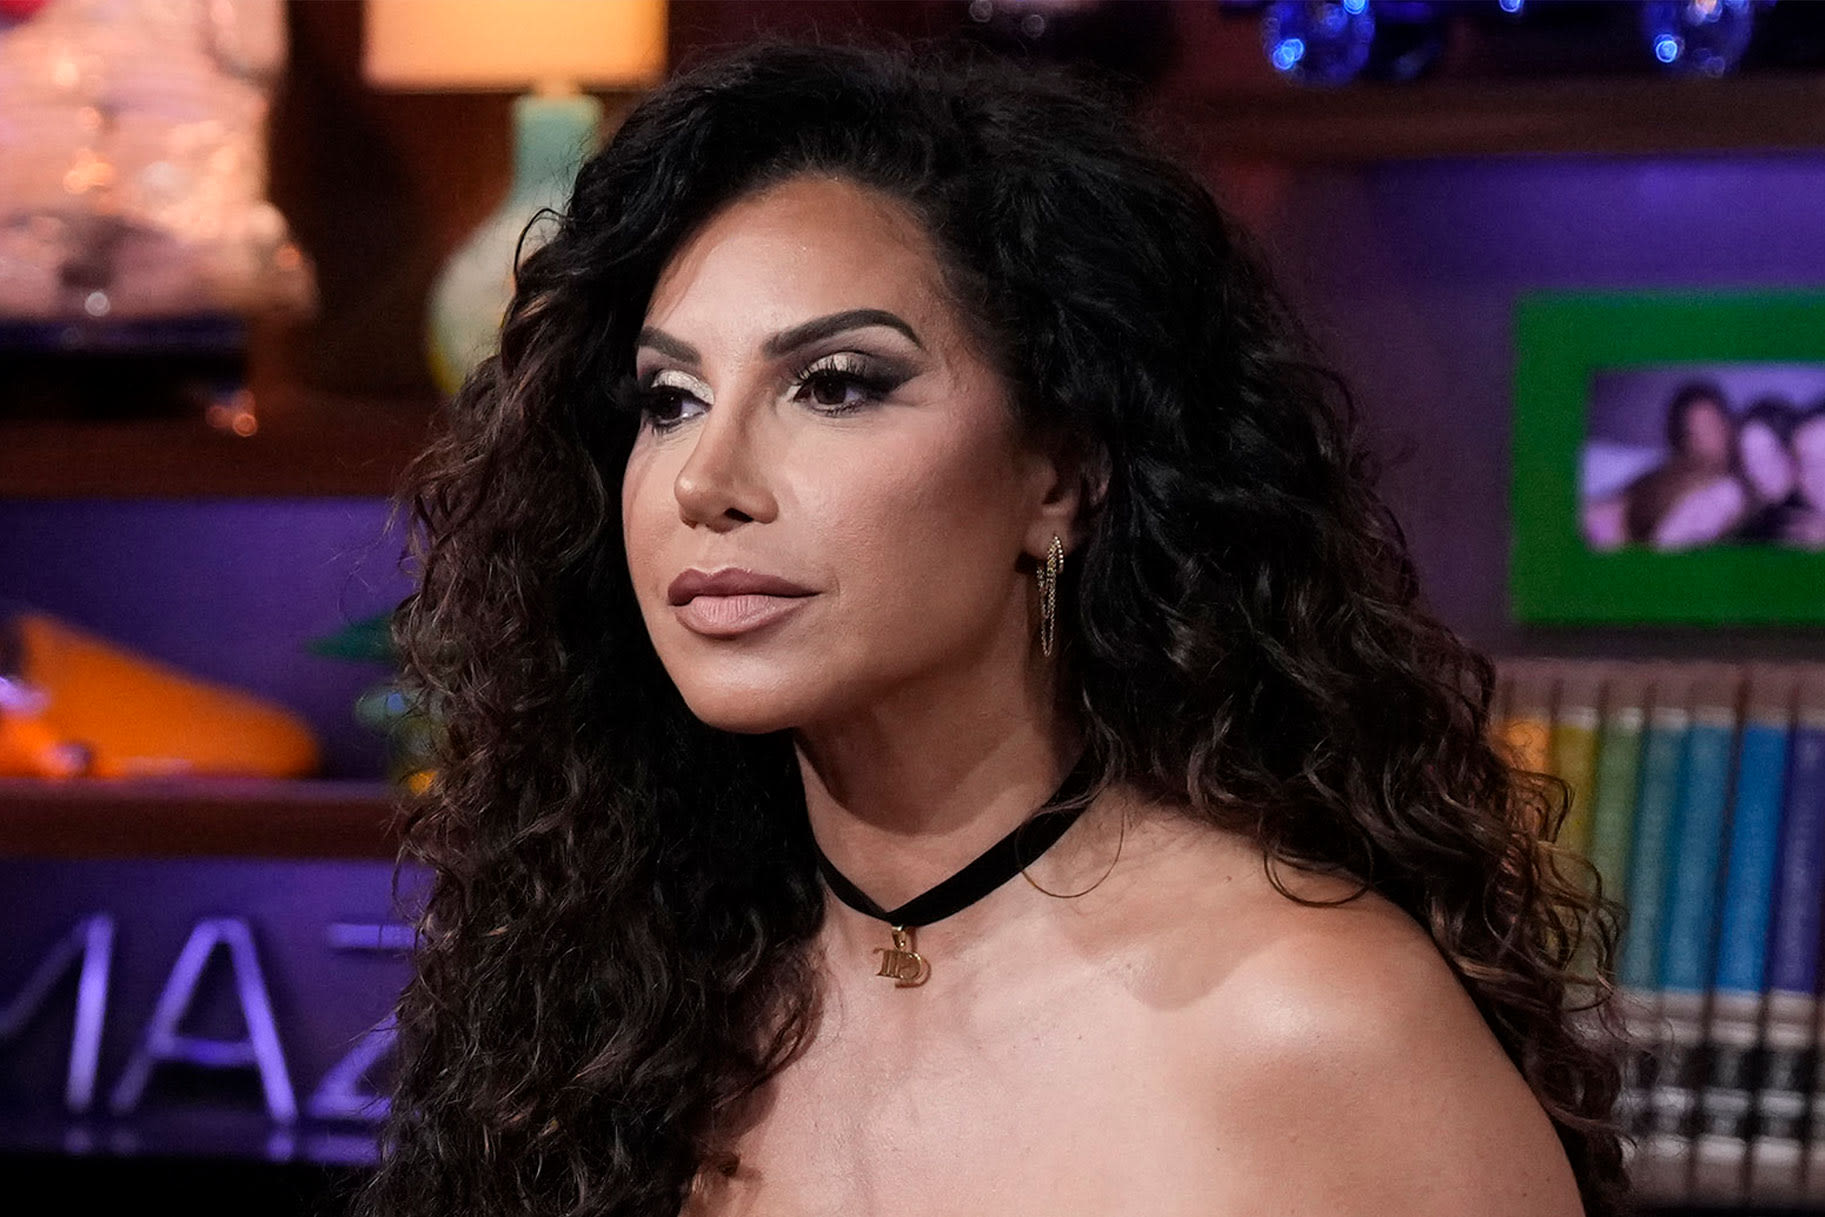 Jen Aydin Addresses Claims She’s Taking Ozempic: “It's Just My Hair” | Bravo TV Official Site